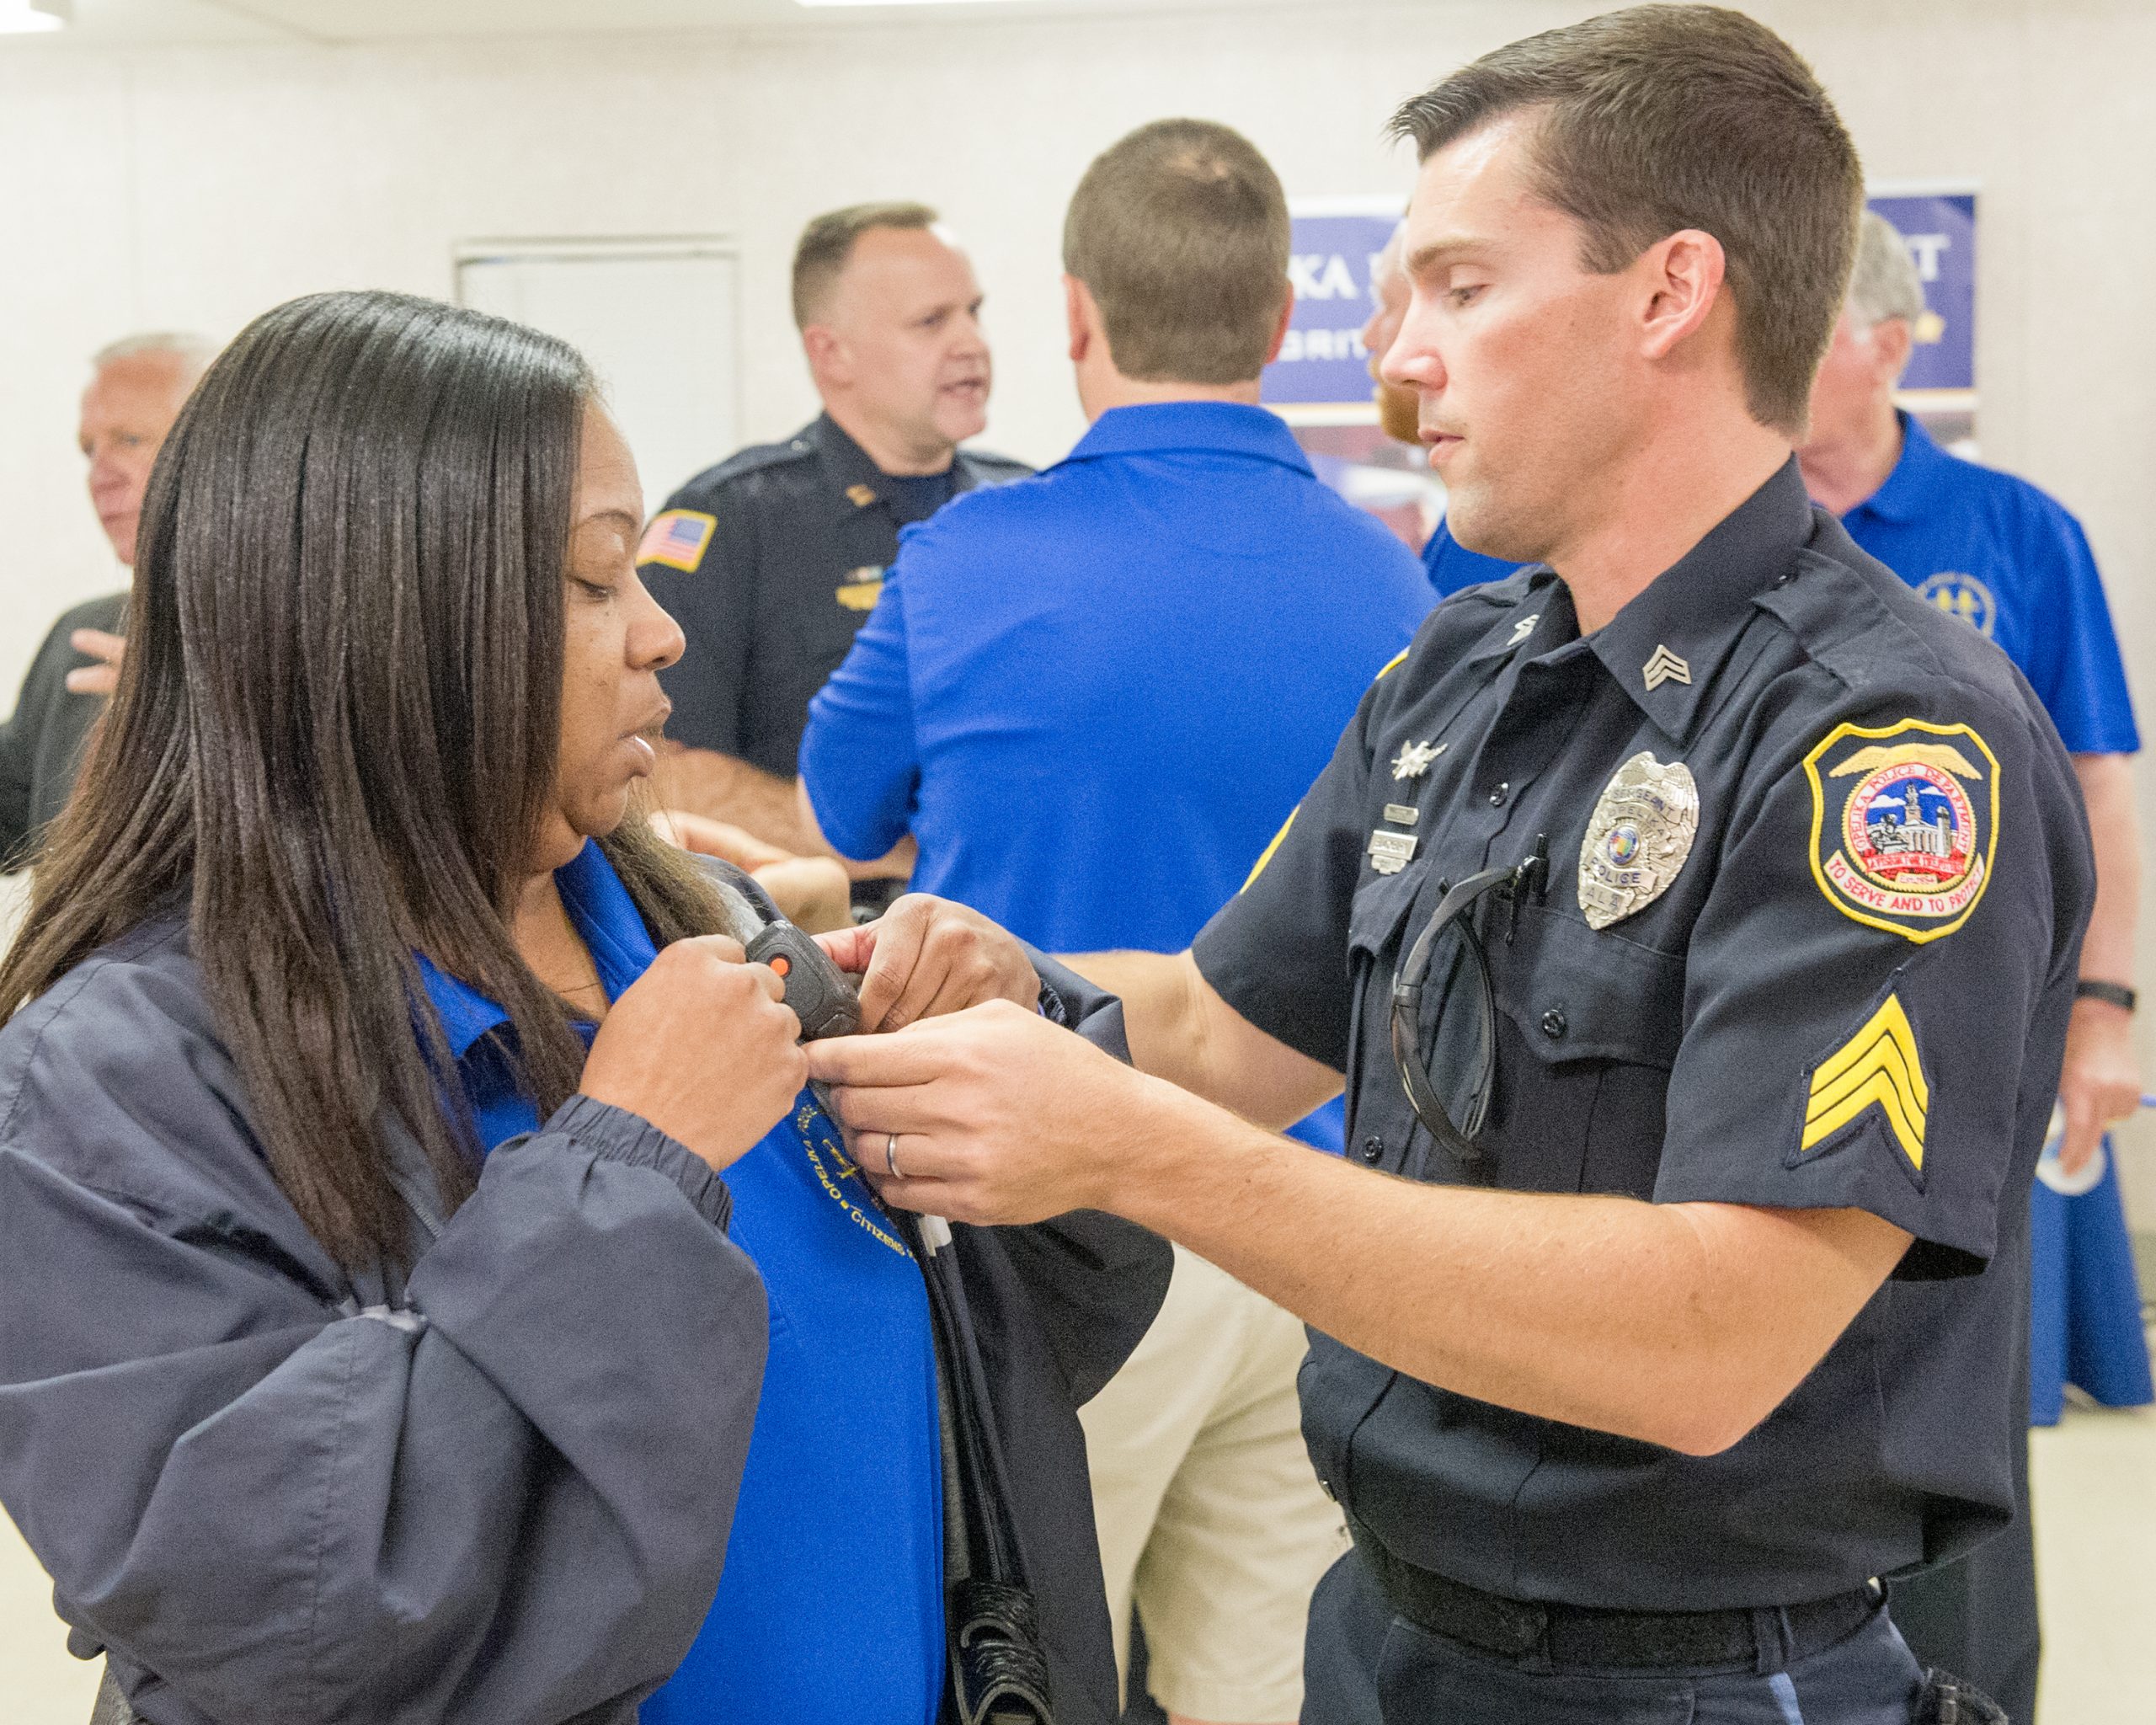 The city of Opelika announces registration dates for ‘Citizen’s Police Academy’